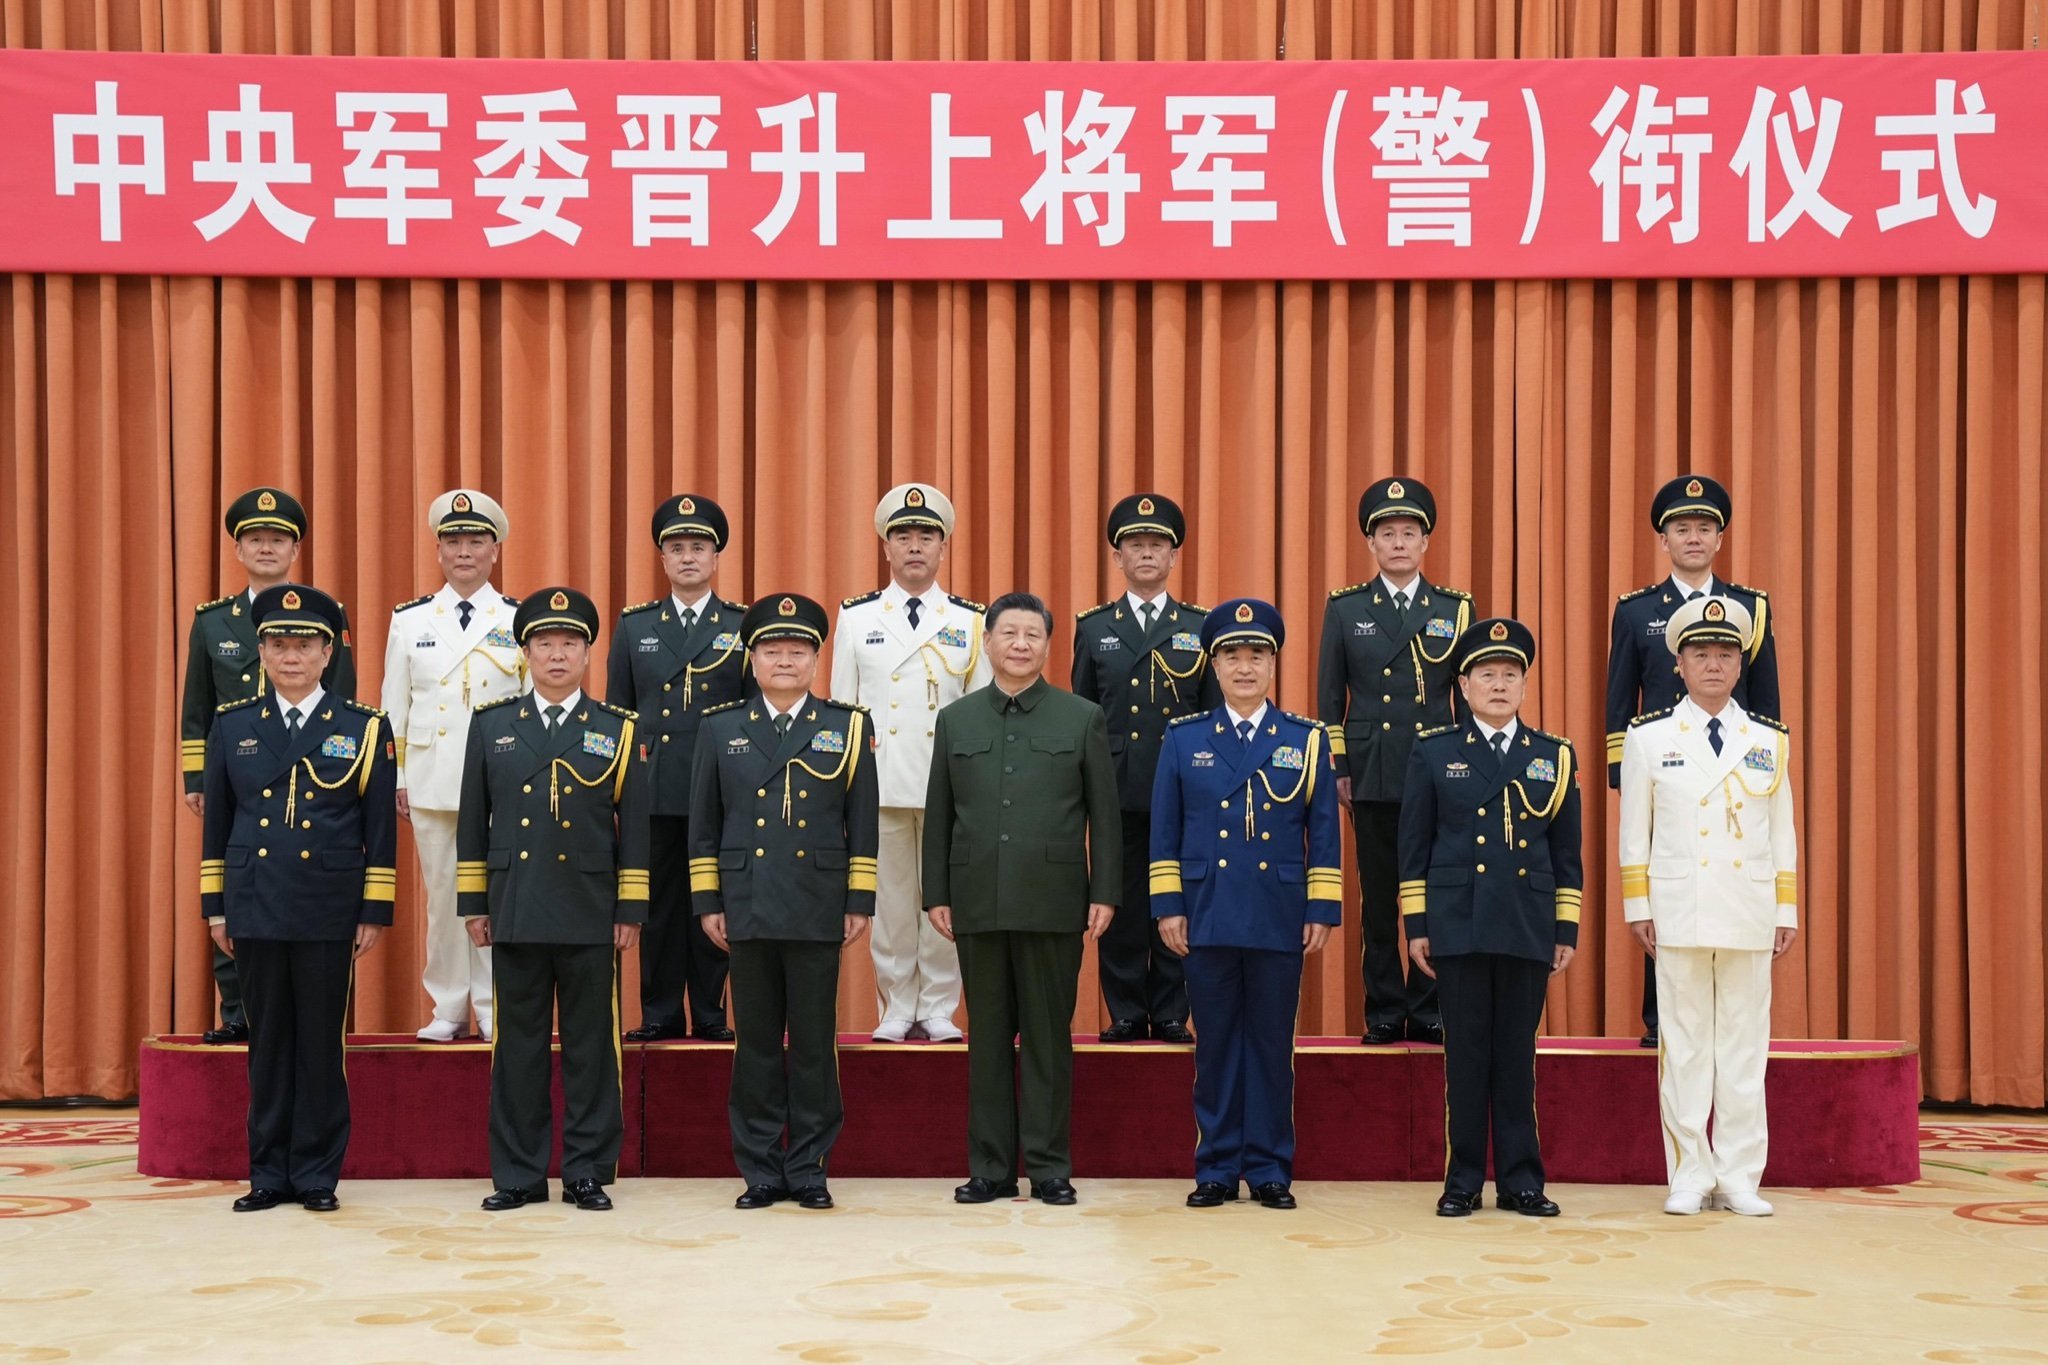 The military has been one of the main targets of President Xi Jinping’s far-reaching anti-corruption campaign. Photo: Handout